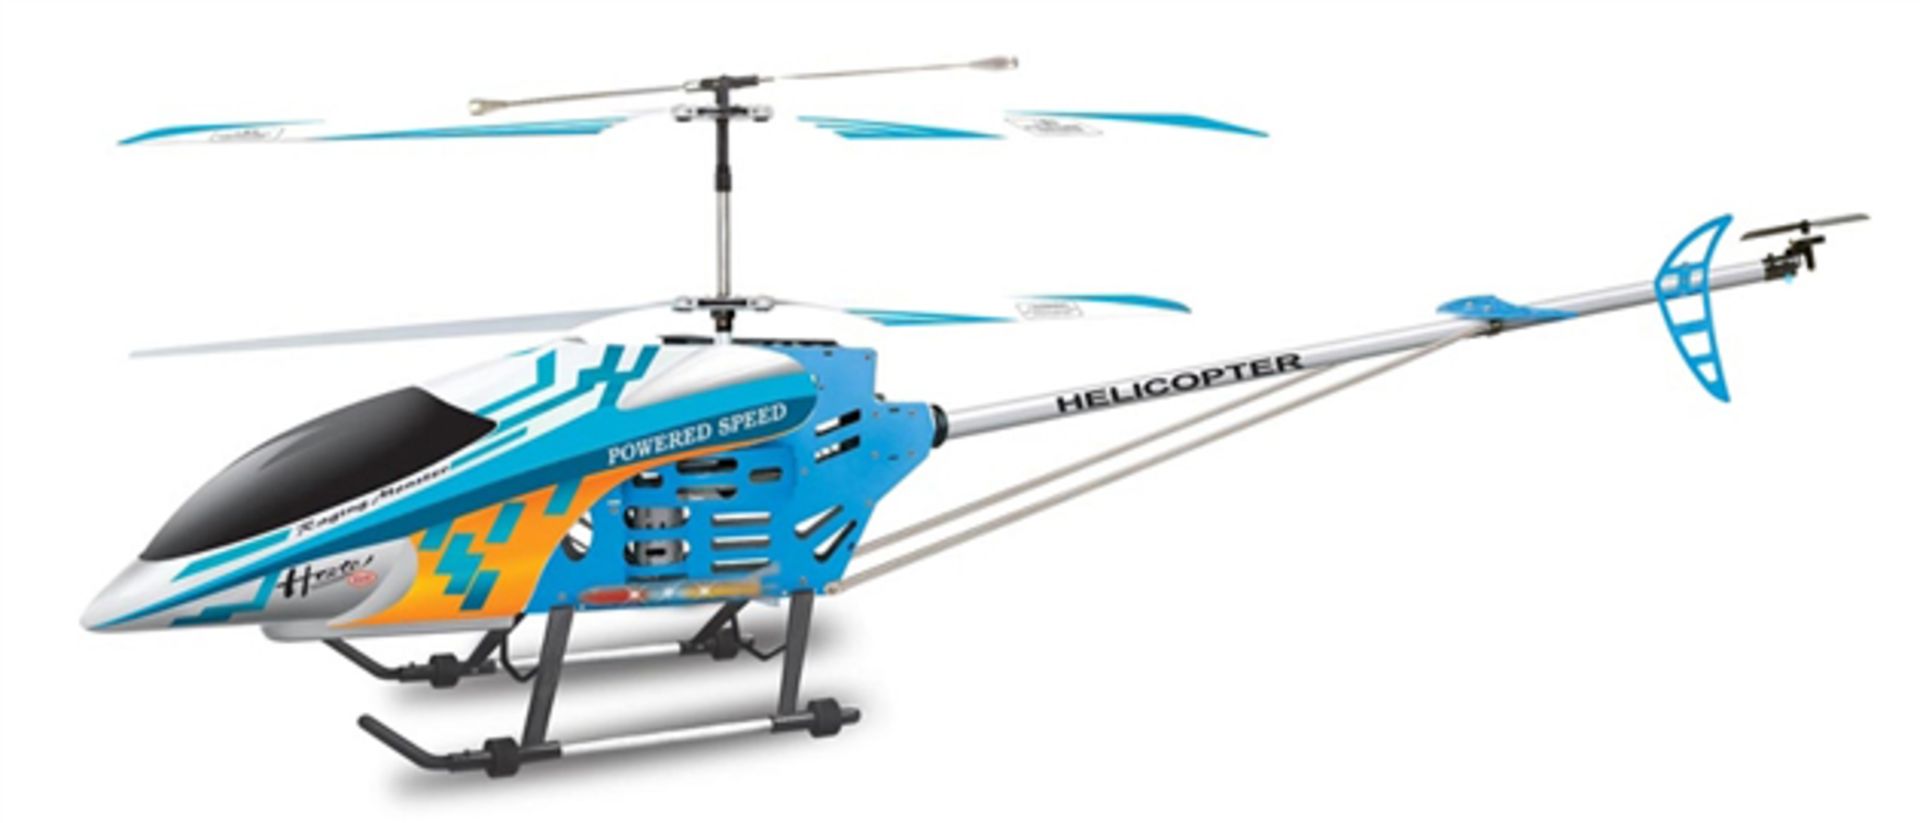 V Brand New The Raptor Very Large R/C Helicopter 120 cm, 3 hannel With yro RRP169.99